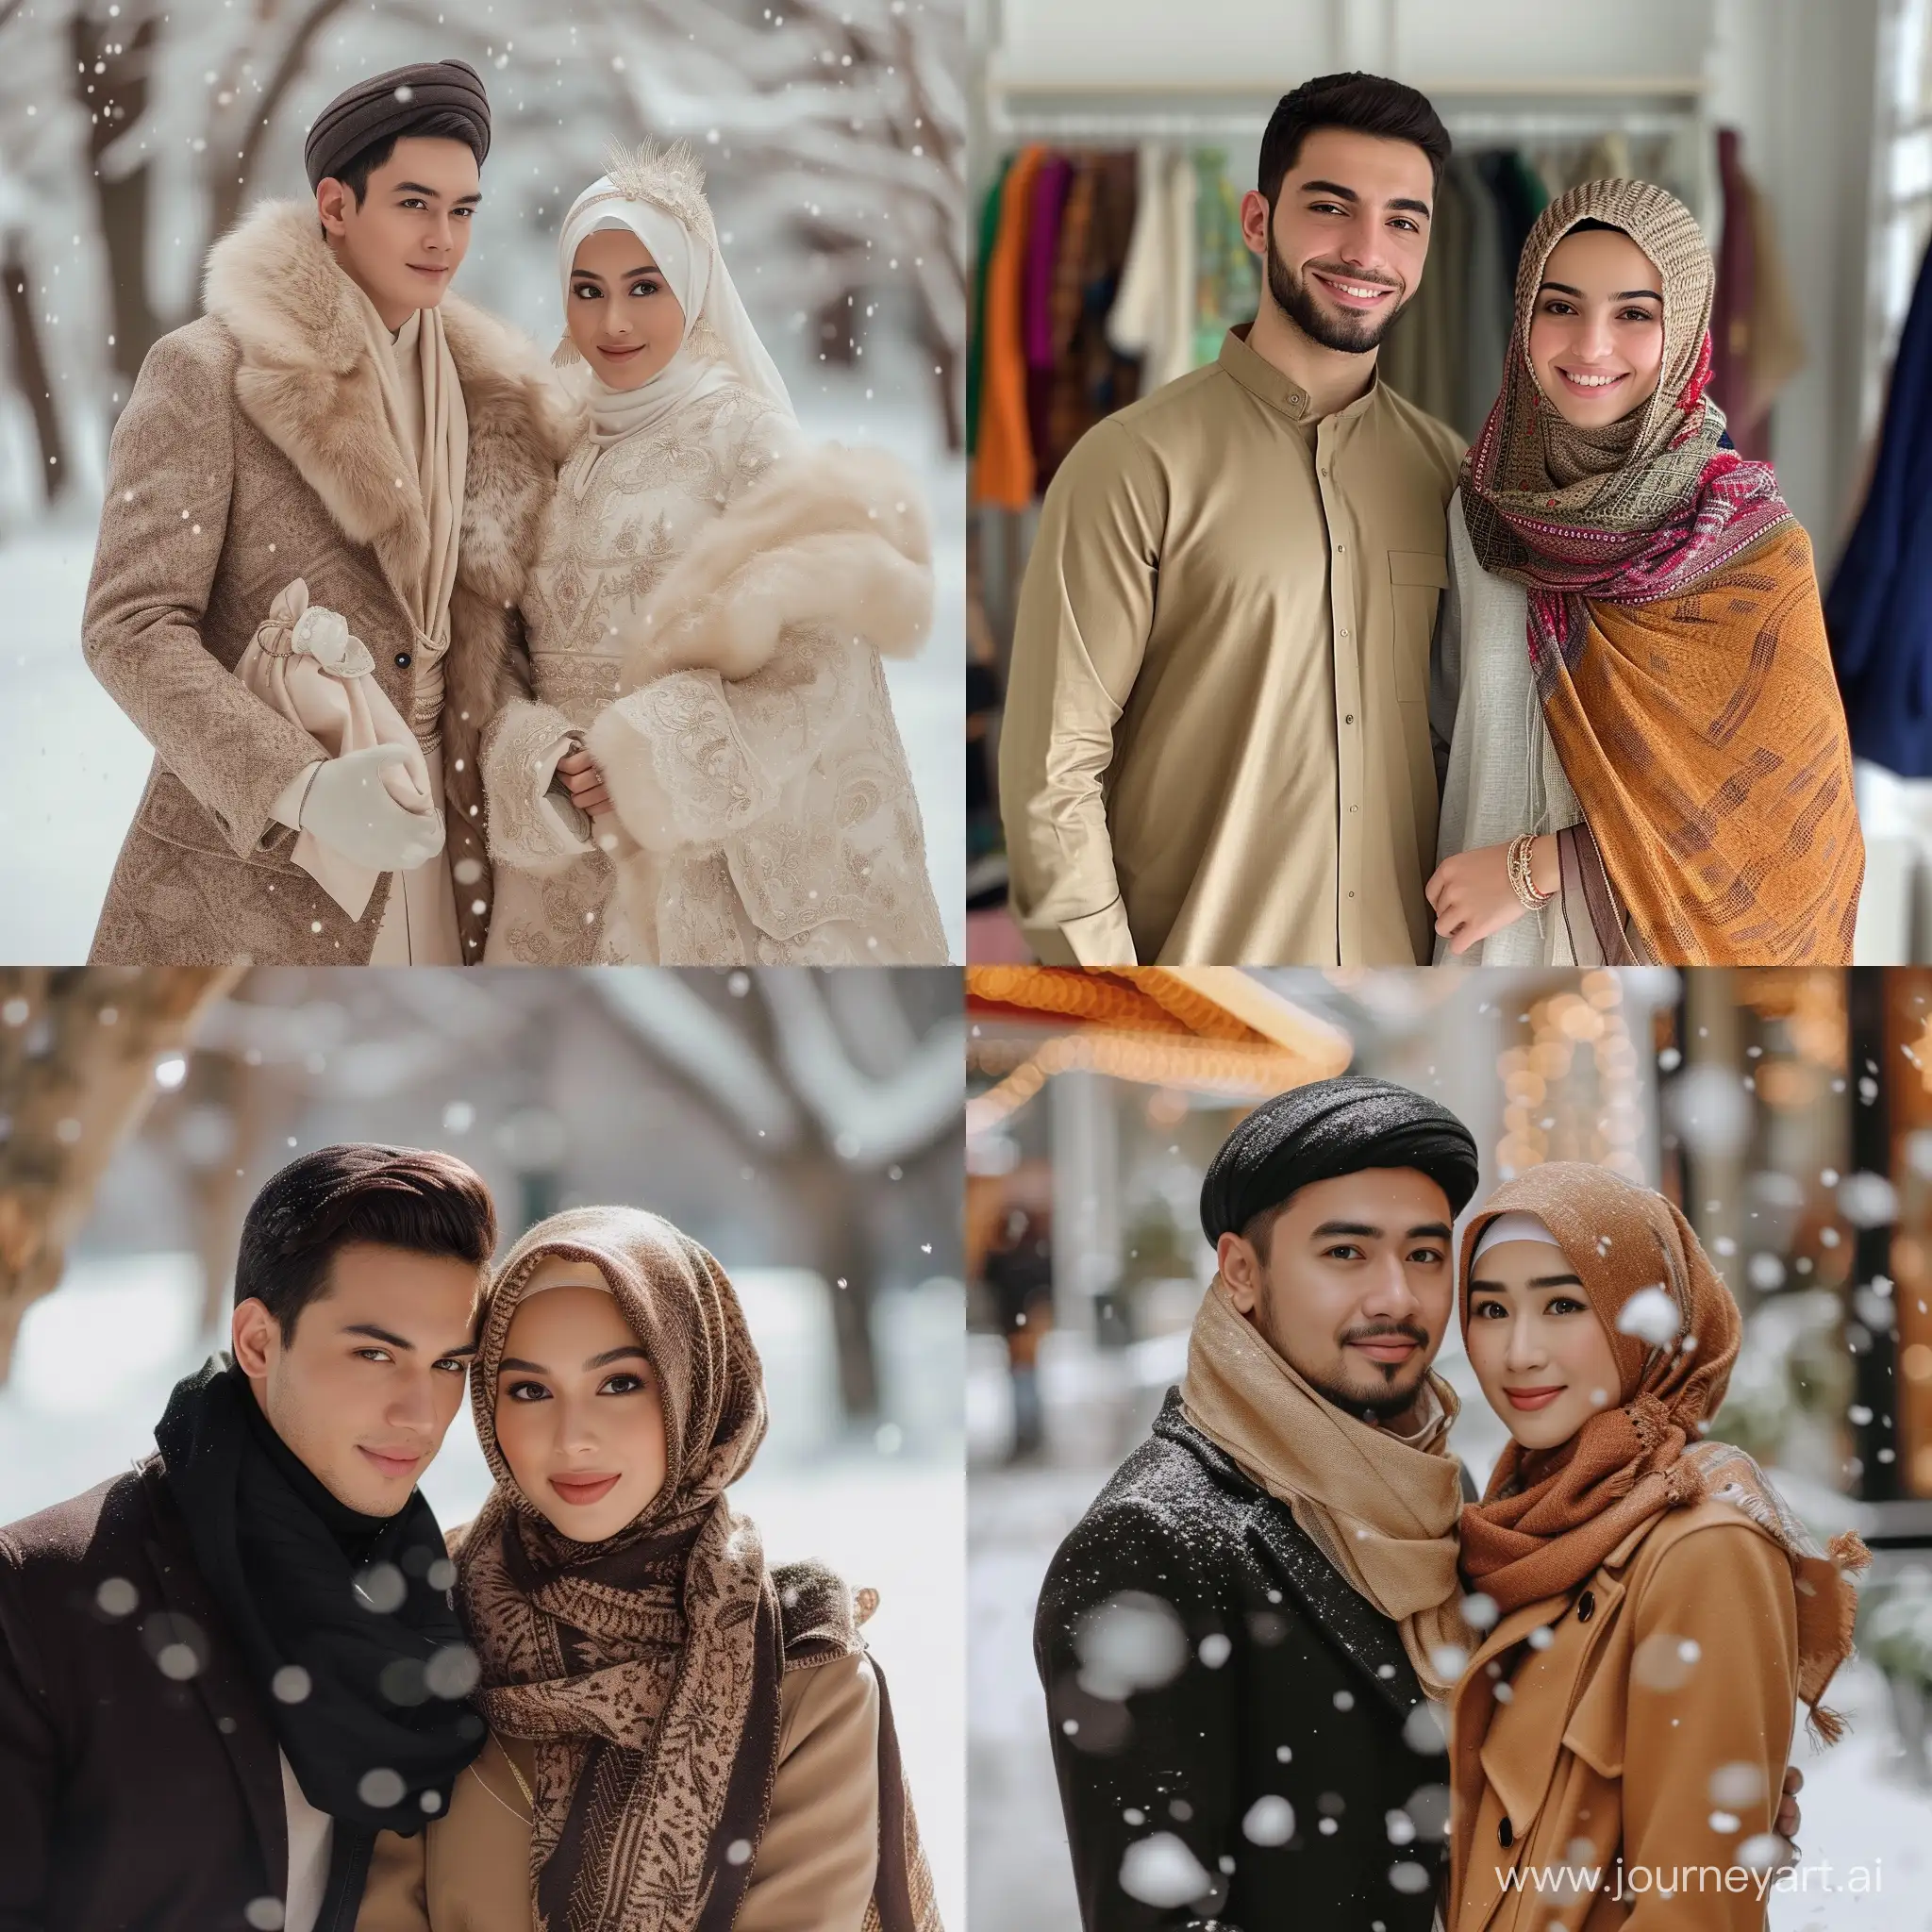 A very beautiful Muslim couple selling winter clothes through Instagram